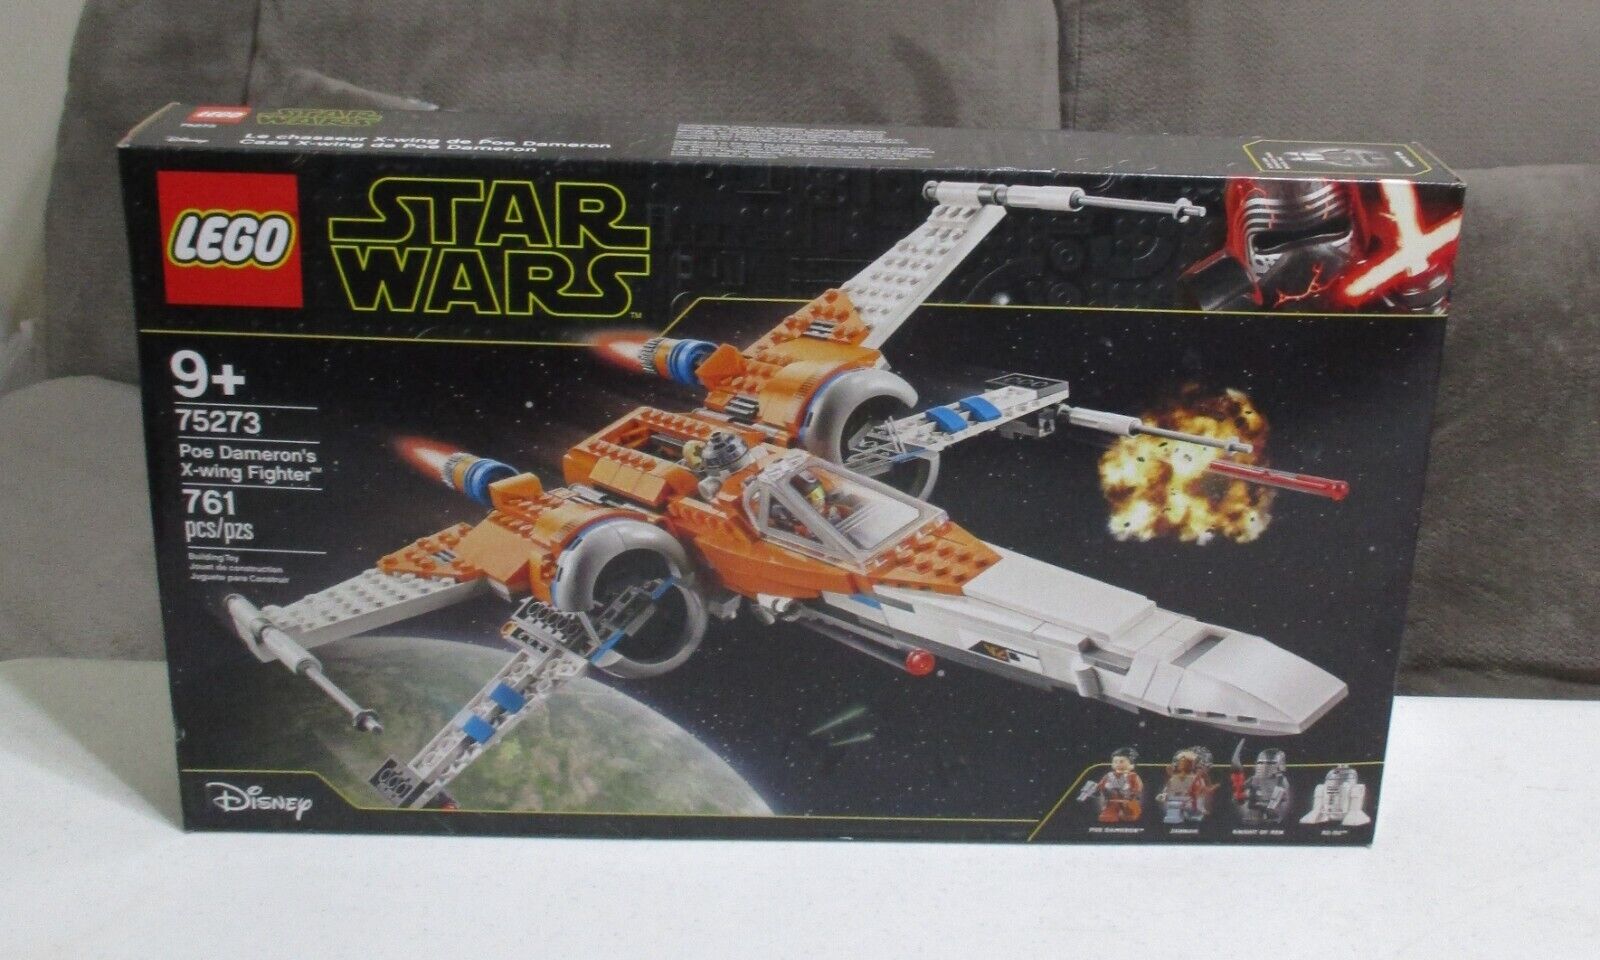 LEGO Star Wars 75273 Poe Dameron's X-wing Fighter ~ NEW ~ Retired